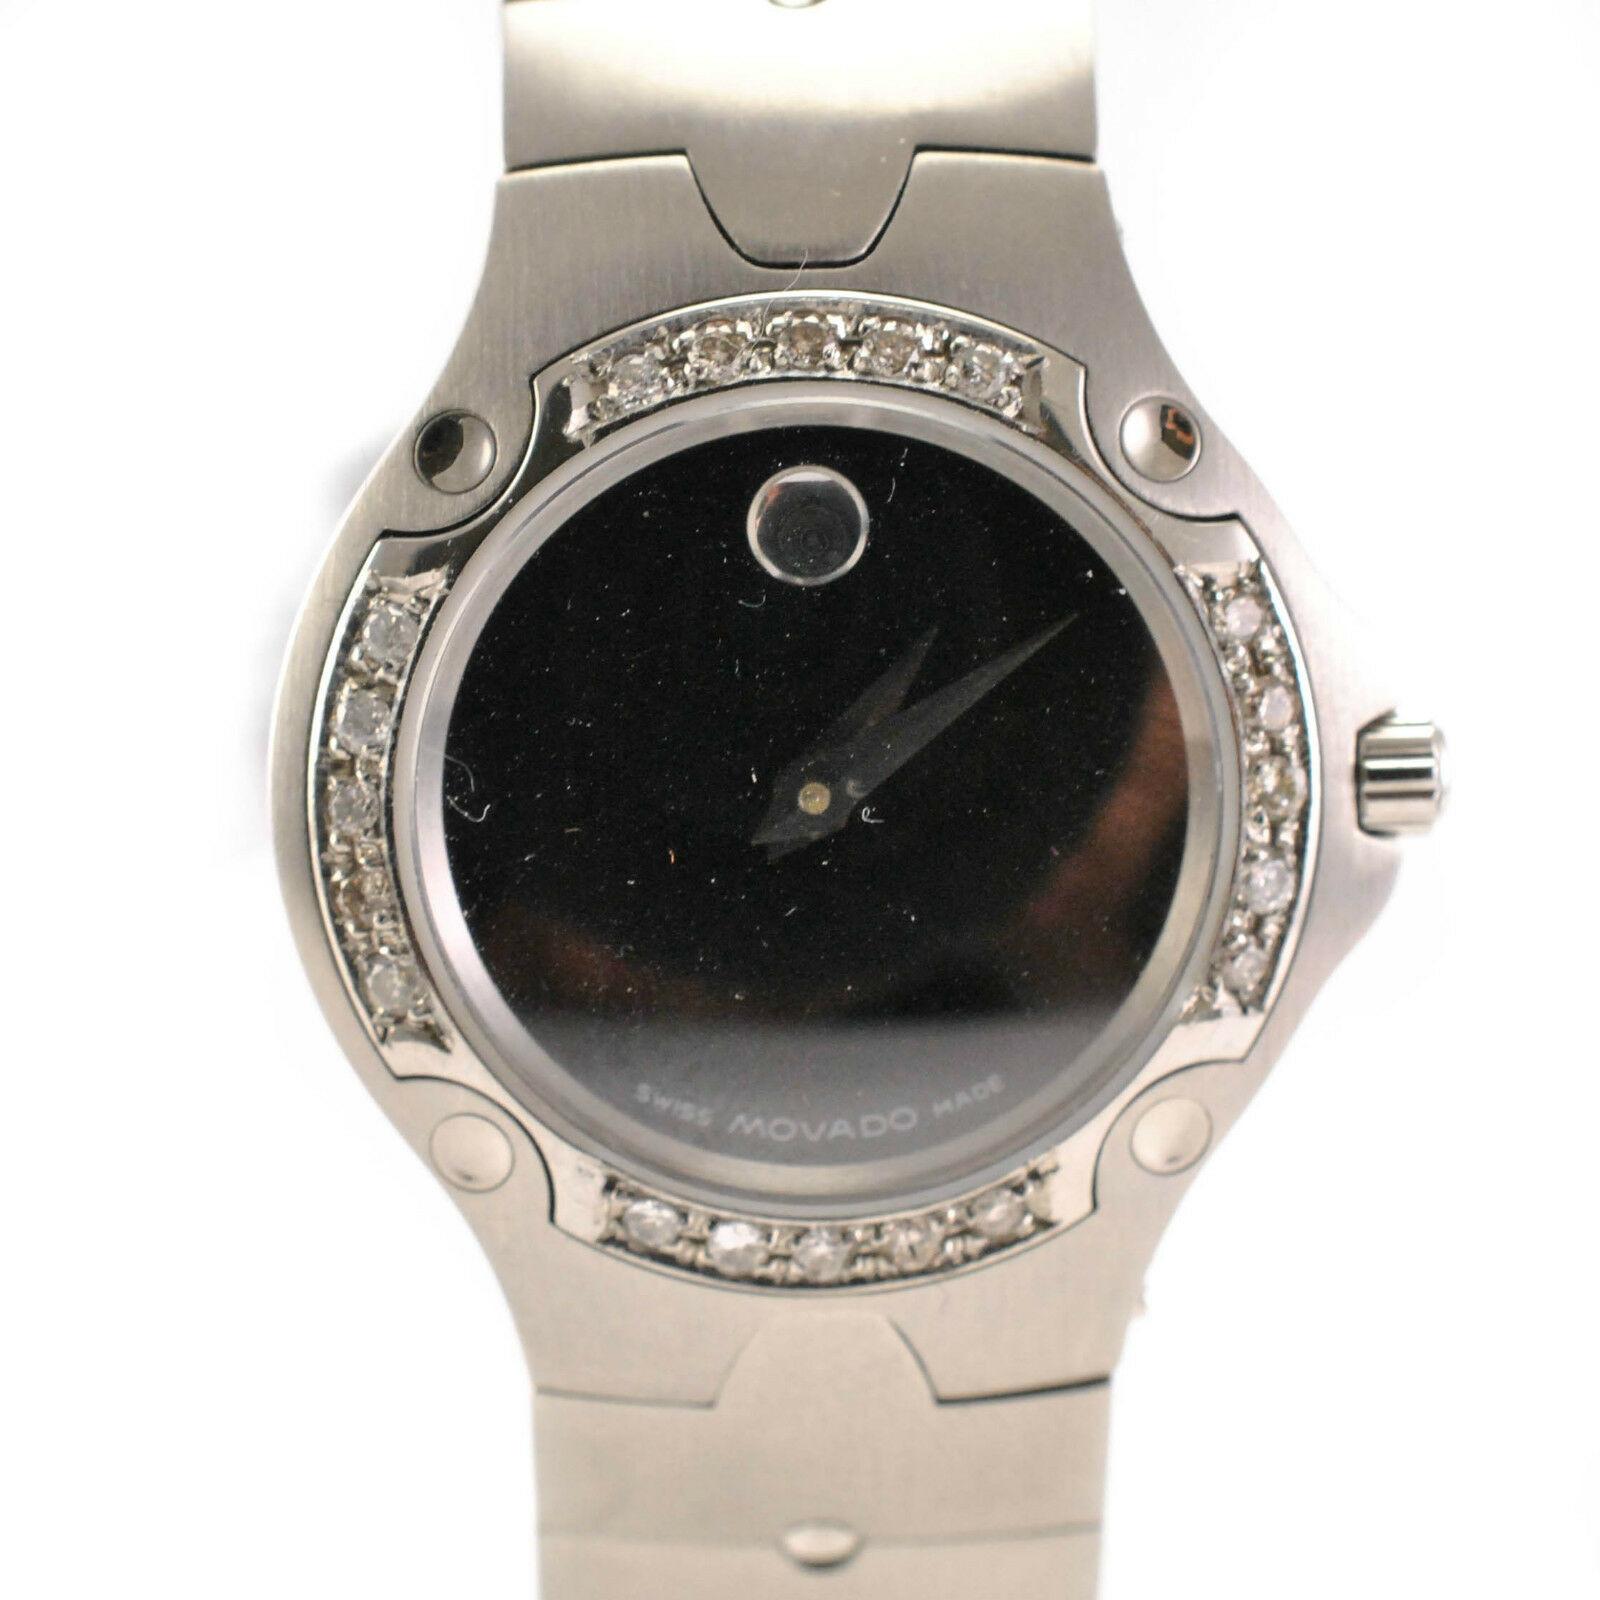 Movado 84 A1 1831 Women's Quartz Watch Stainless Steel Black Dial Diamond Bezel In Excellent Condition For Sale In Miami, FL